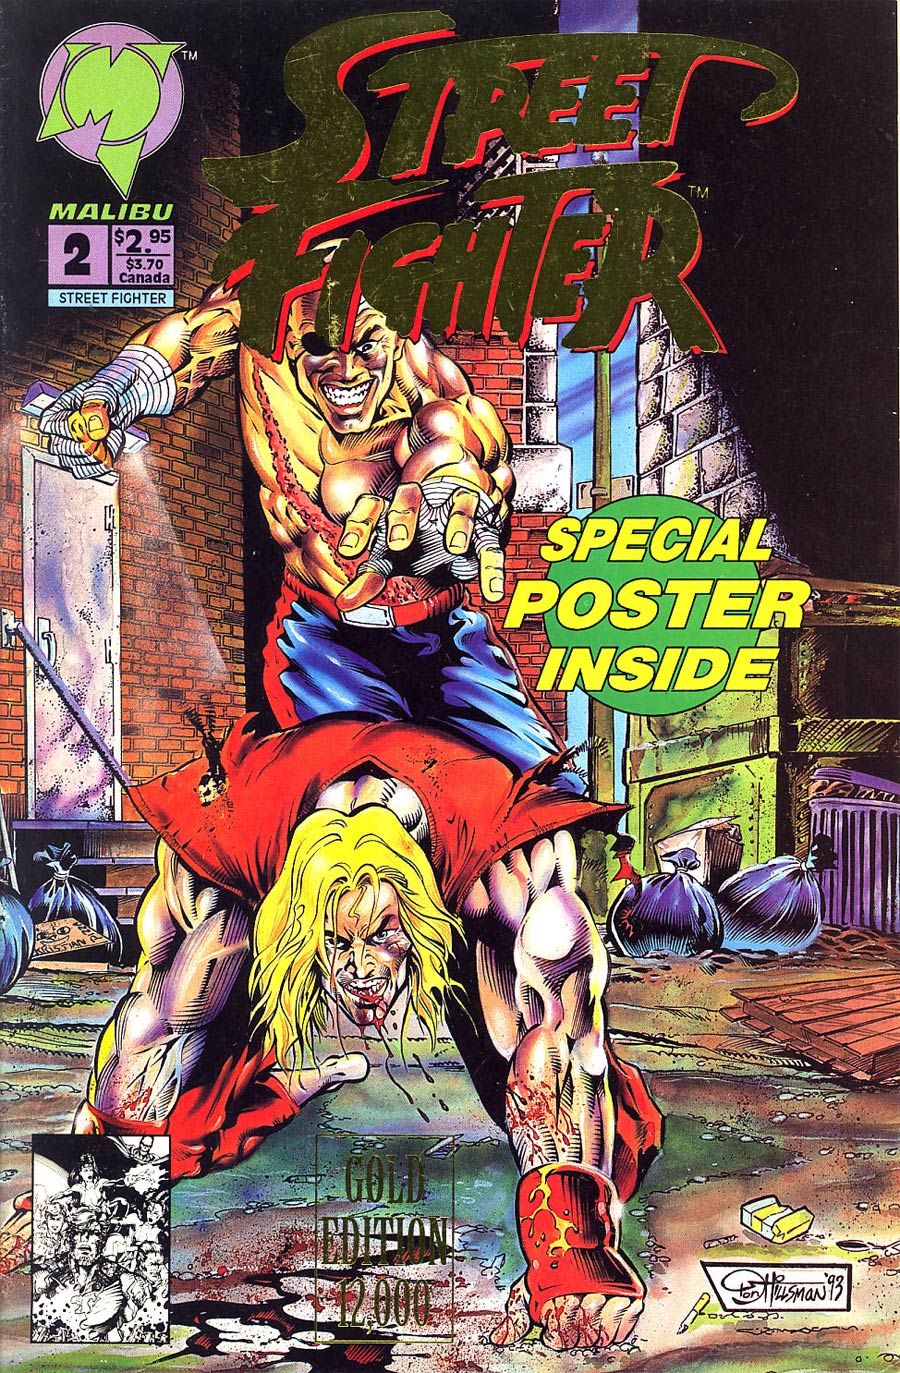 Street Fighter (Malibu) #2 Cover D Gold Edition Foil Without Polybag and Poster